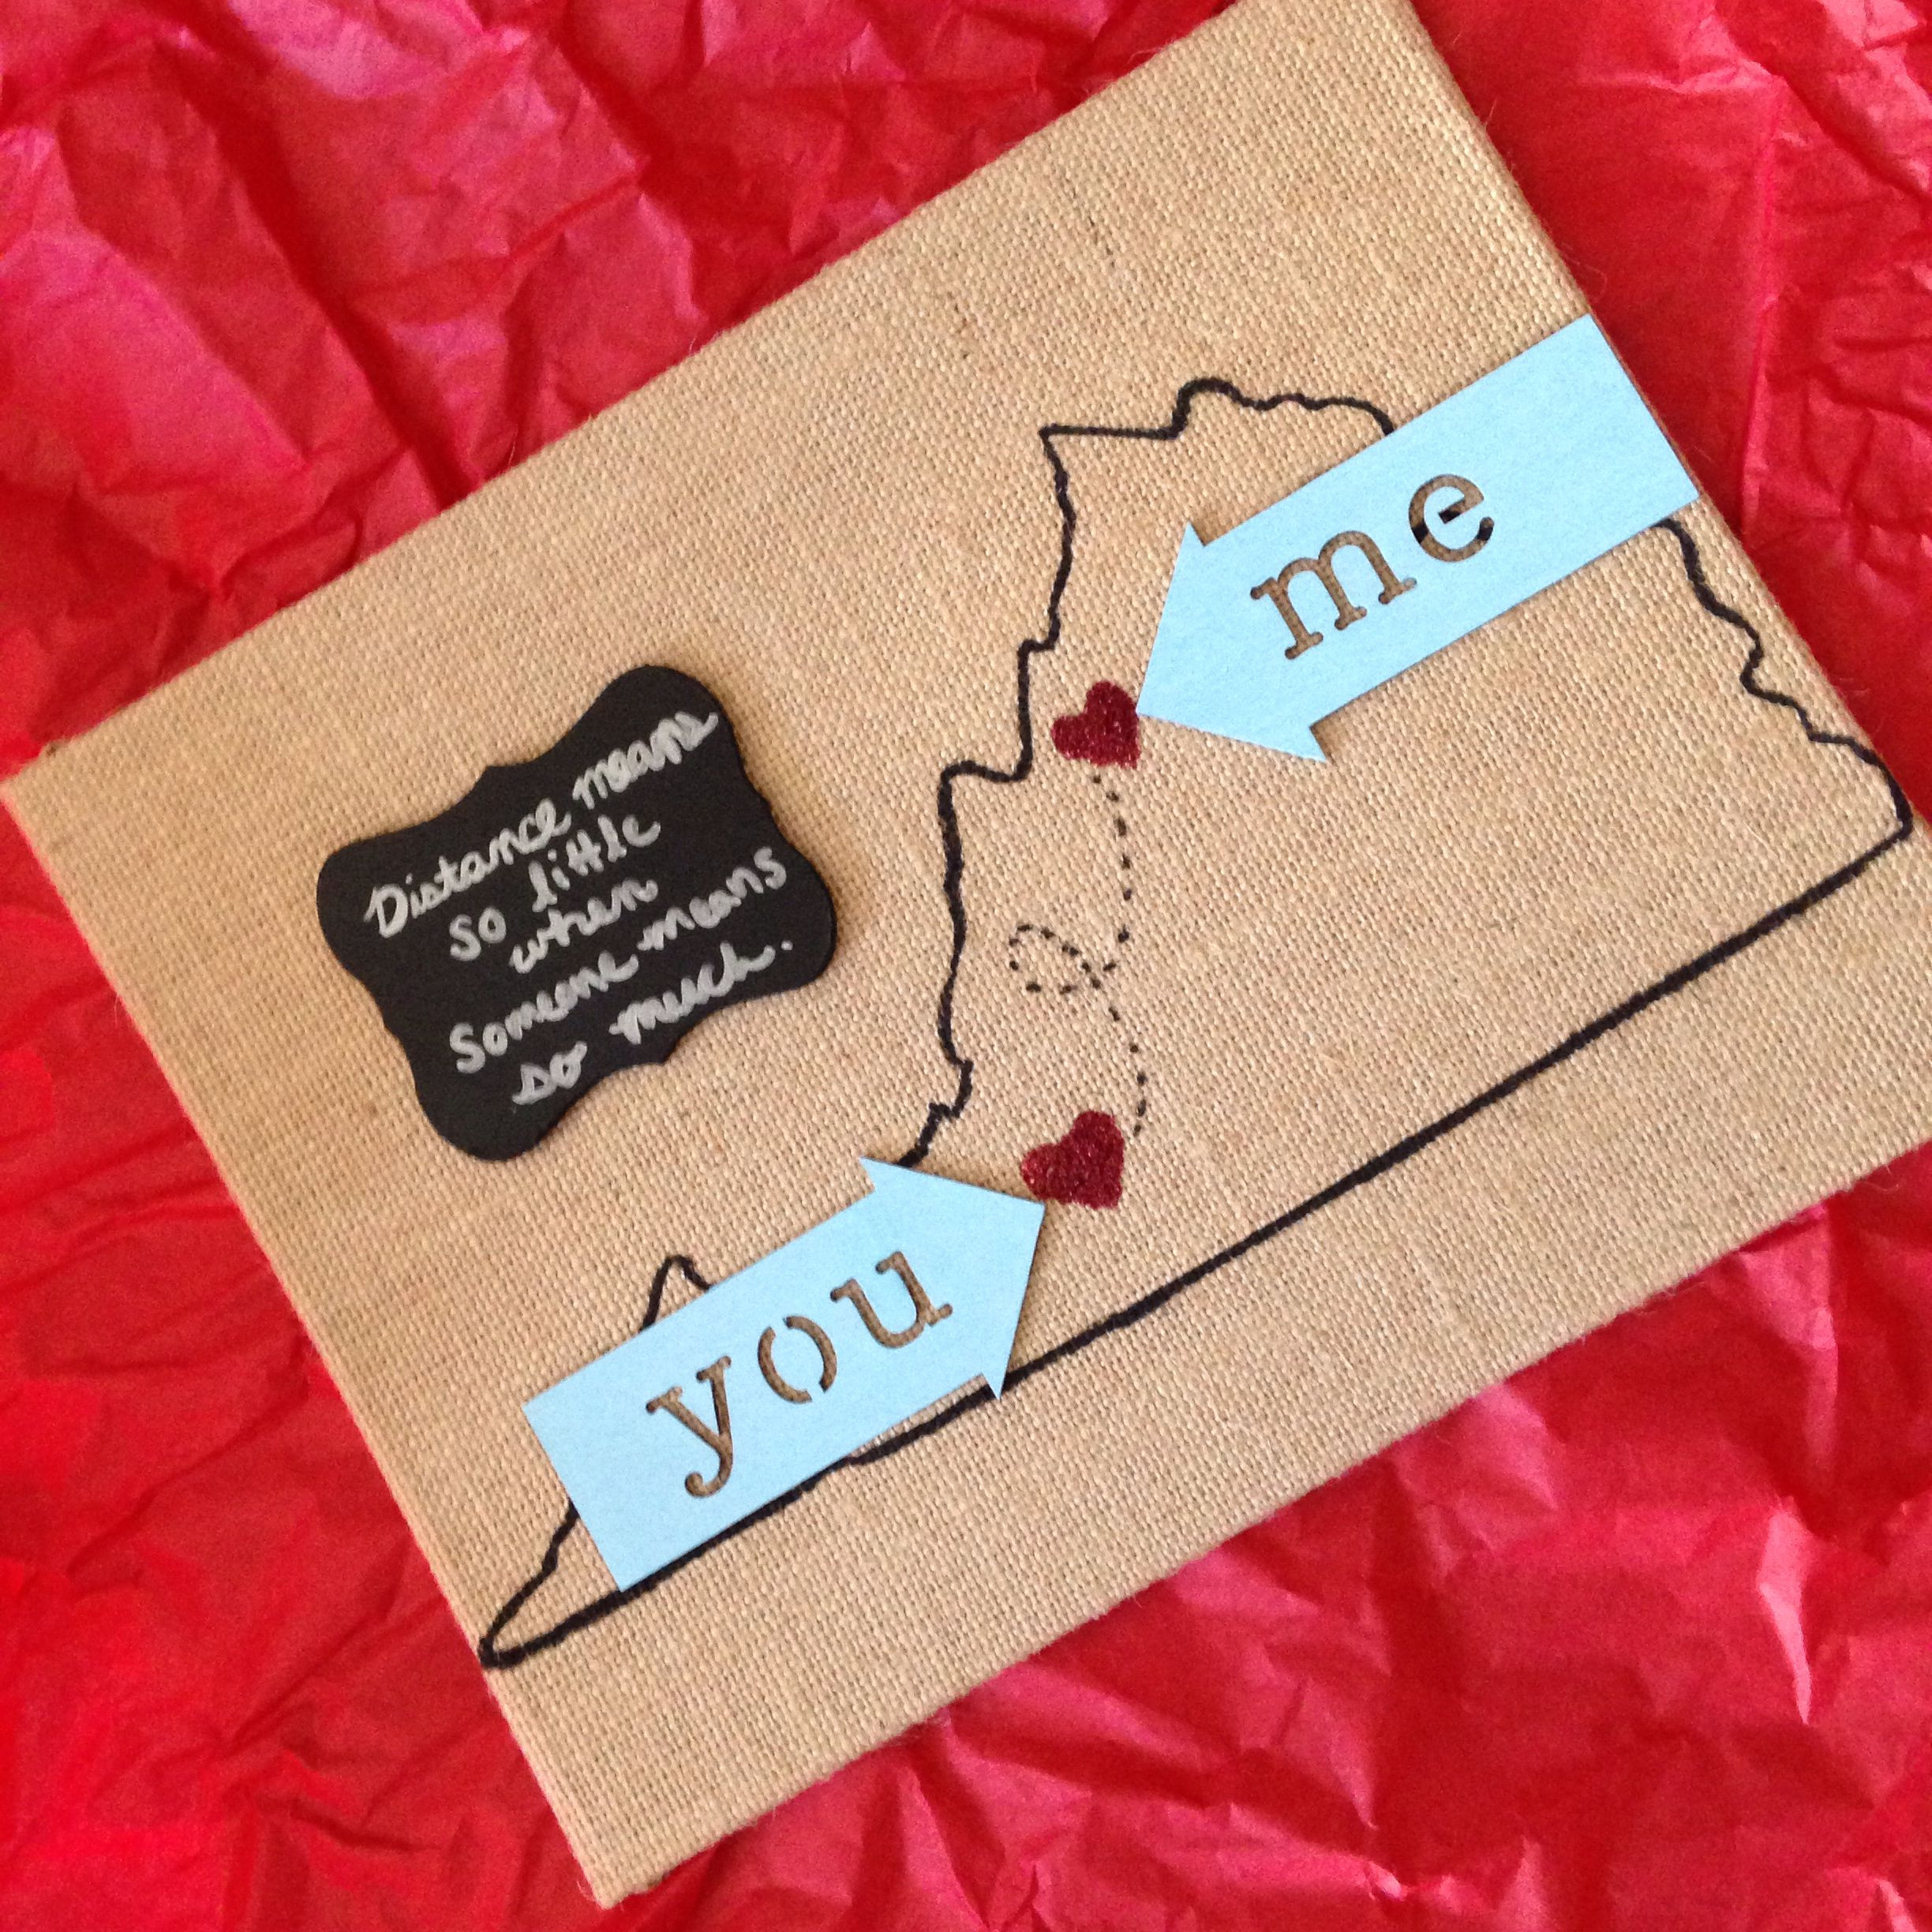 Long Distance Relationship Valentines Day Ideas
 I m in a long distance relationship & I made this for my